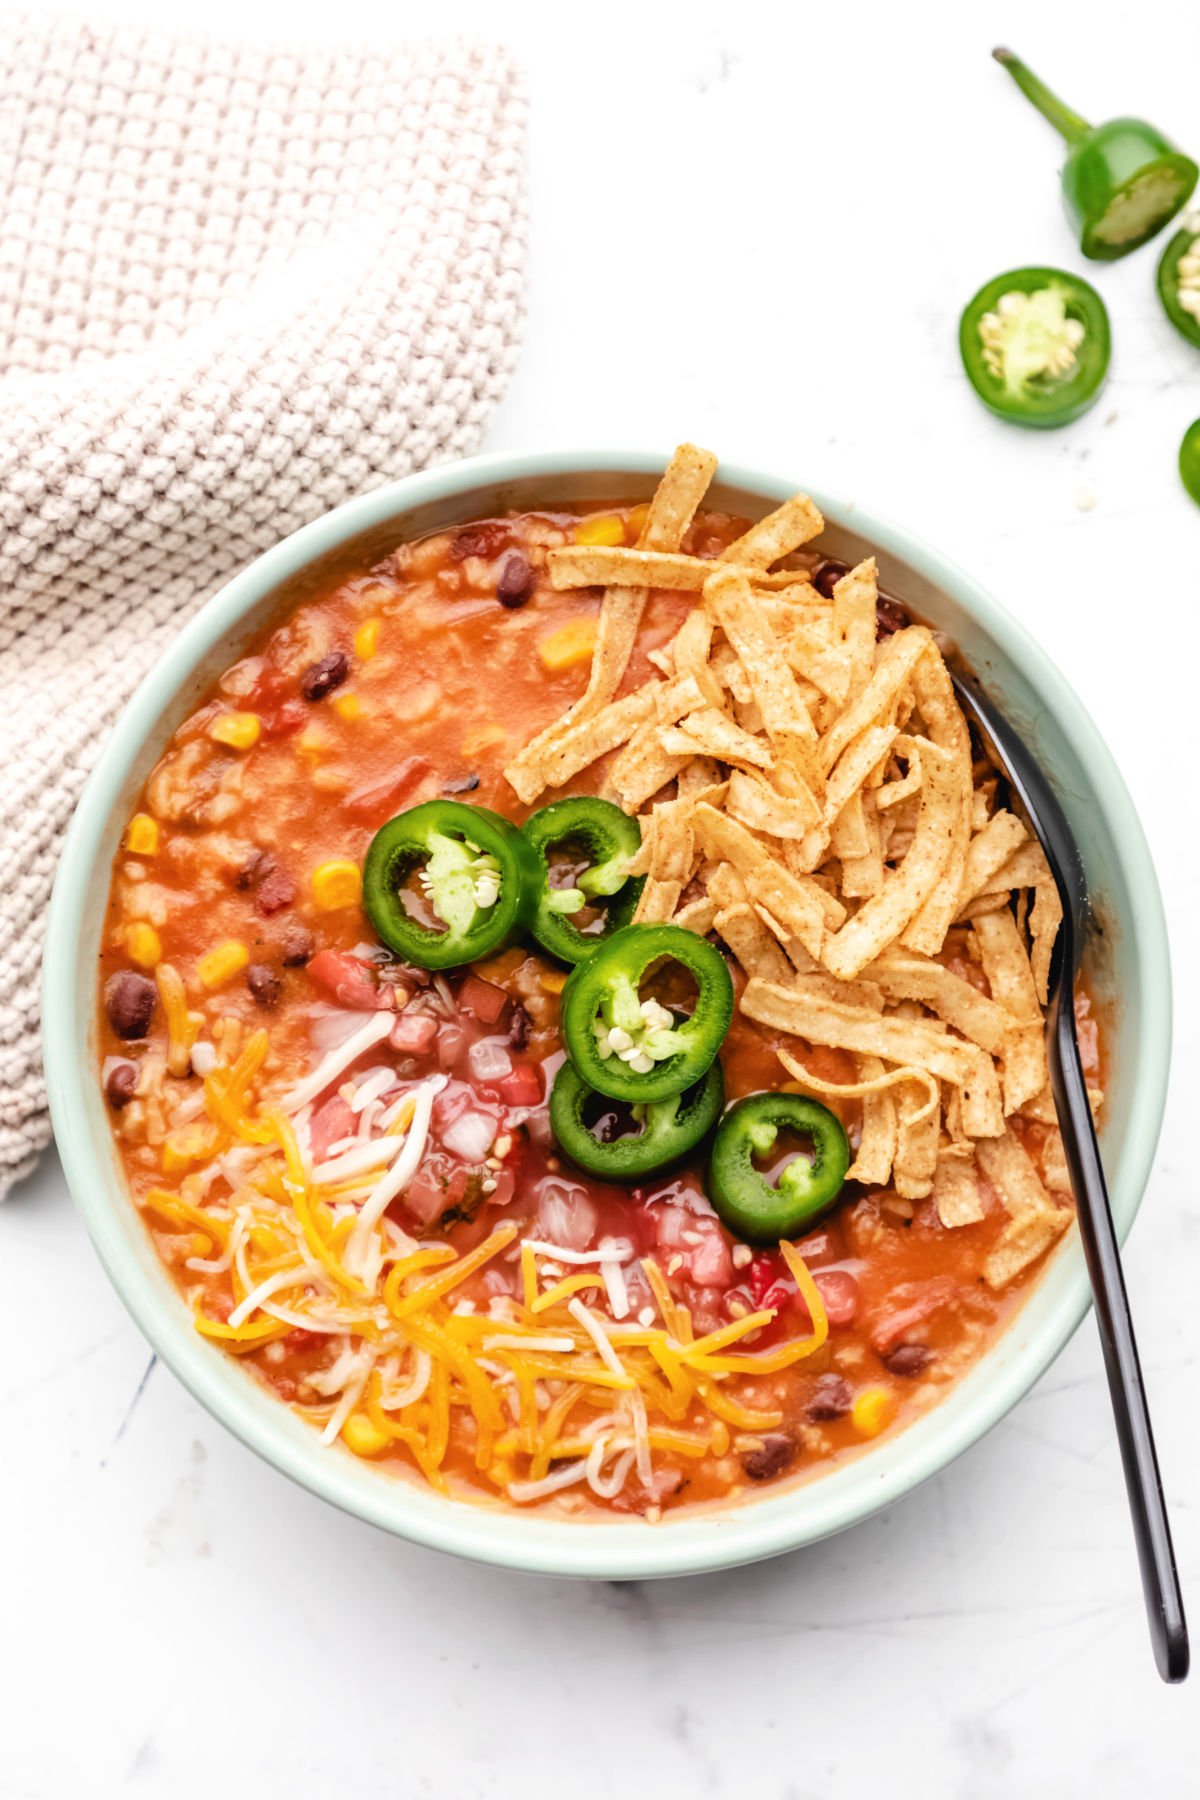 A soup bowl filled with vegetarian tortilla soup that's garnished with shredded cheese, sliced jalapeños, and tortilla strips.